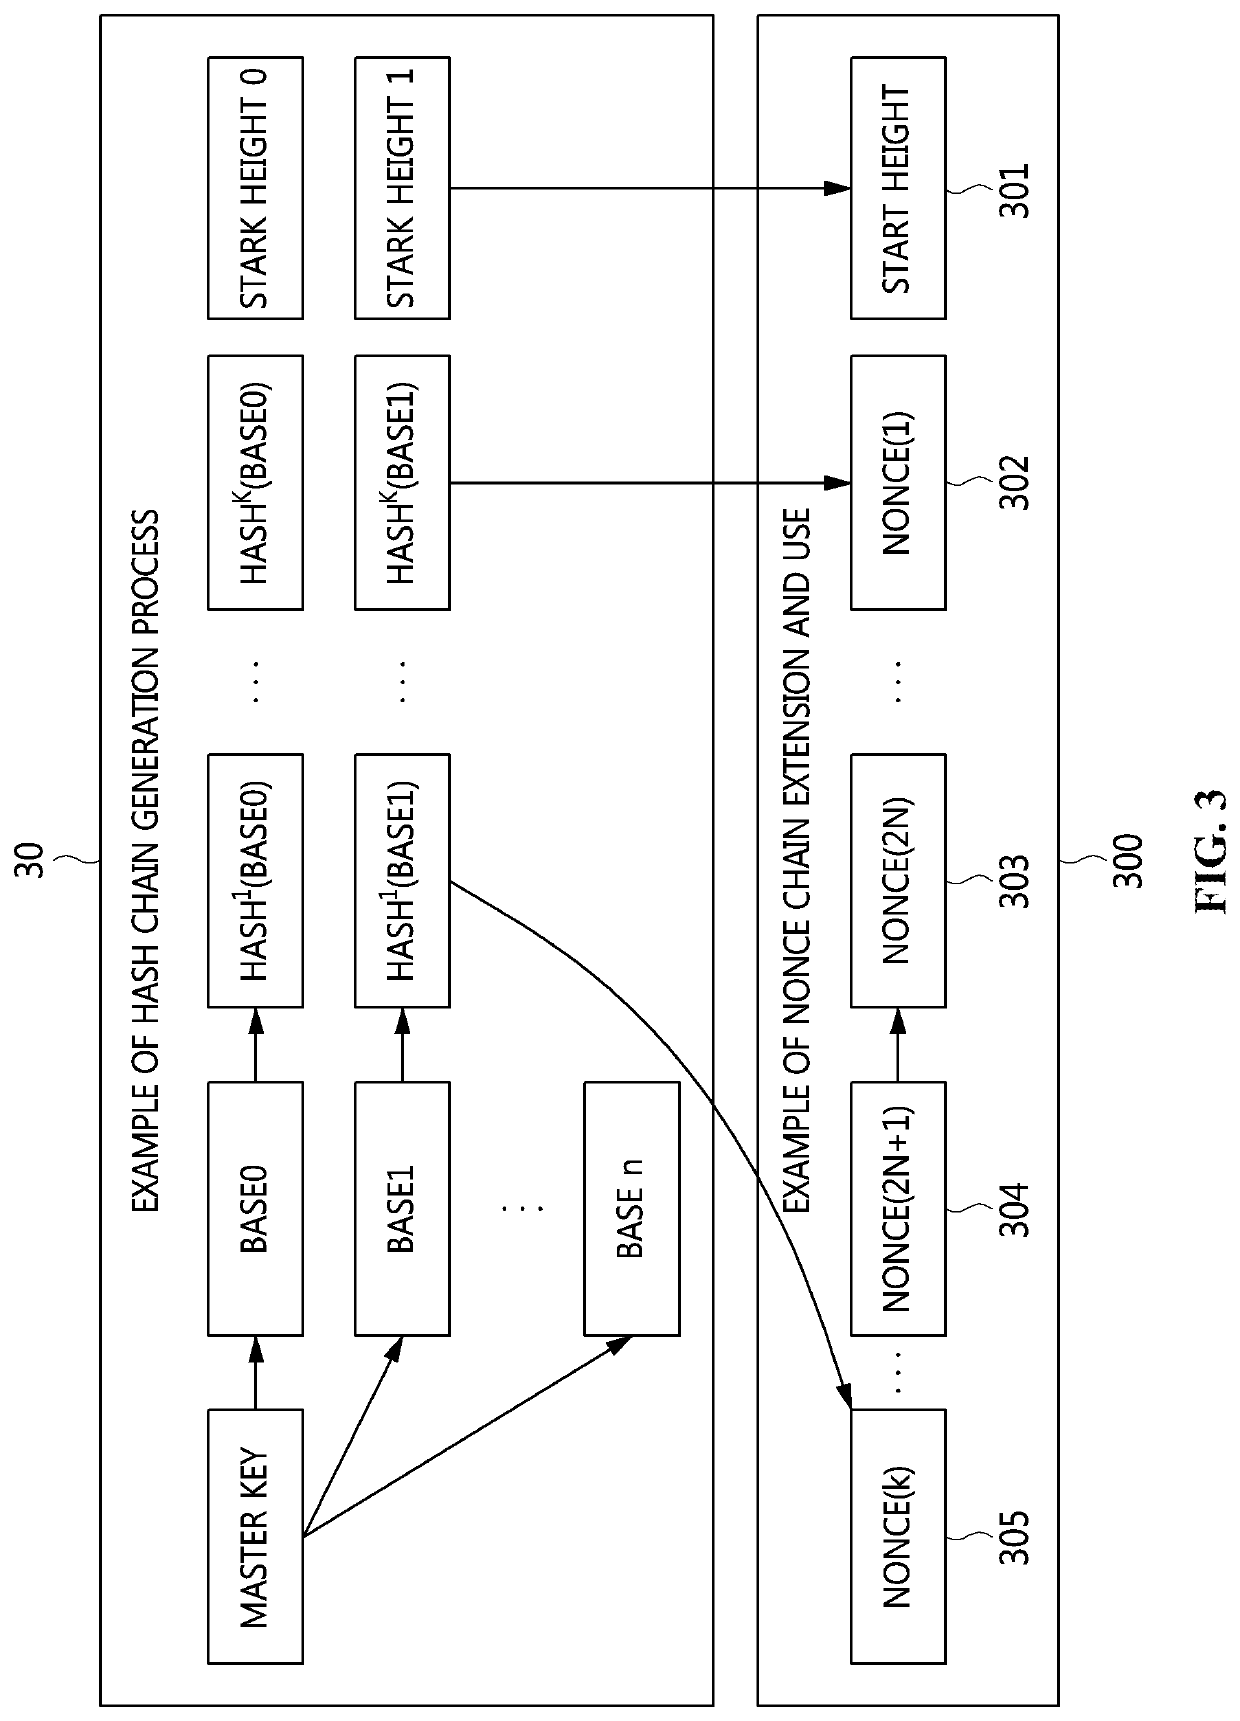 Apparatus and method for achieving distributed consensus based on decentralized byzantine fault tolerance